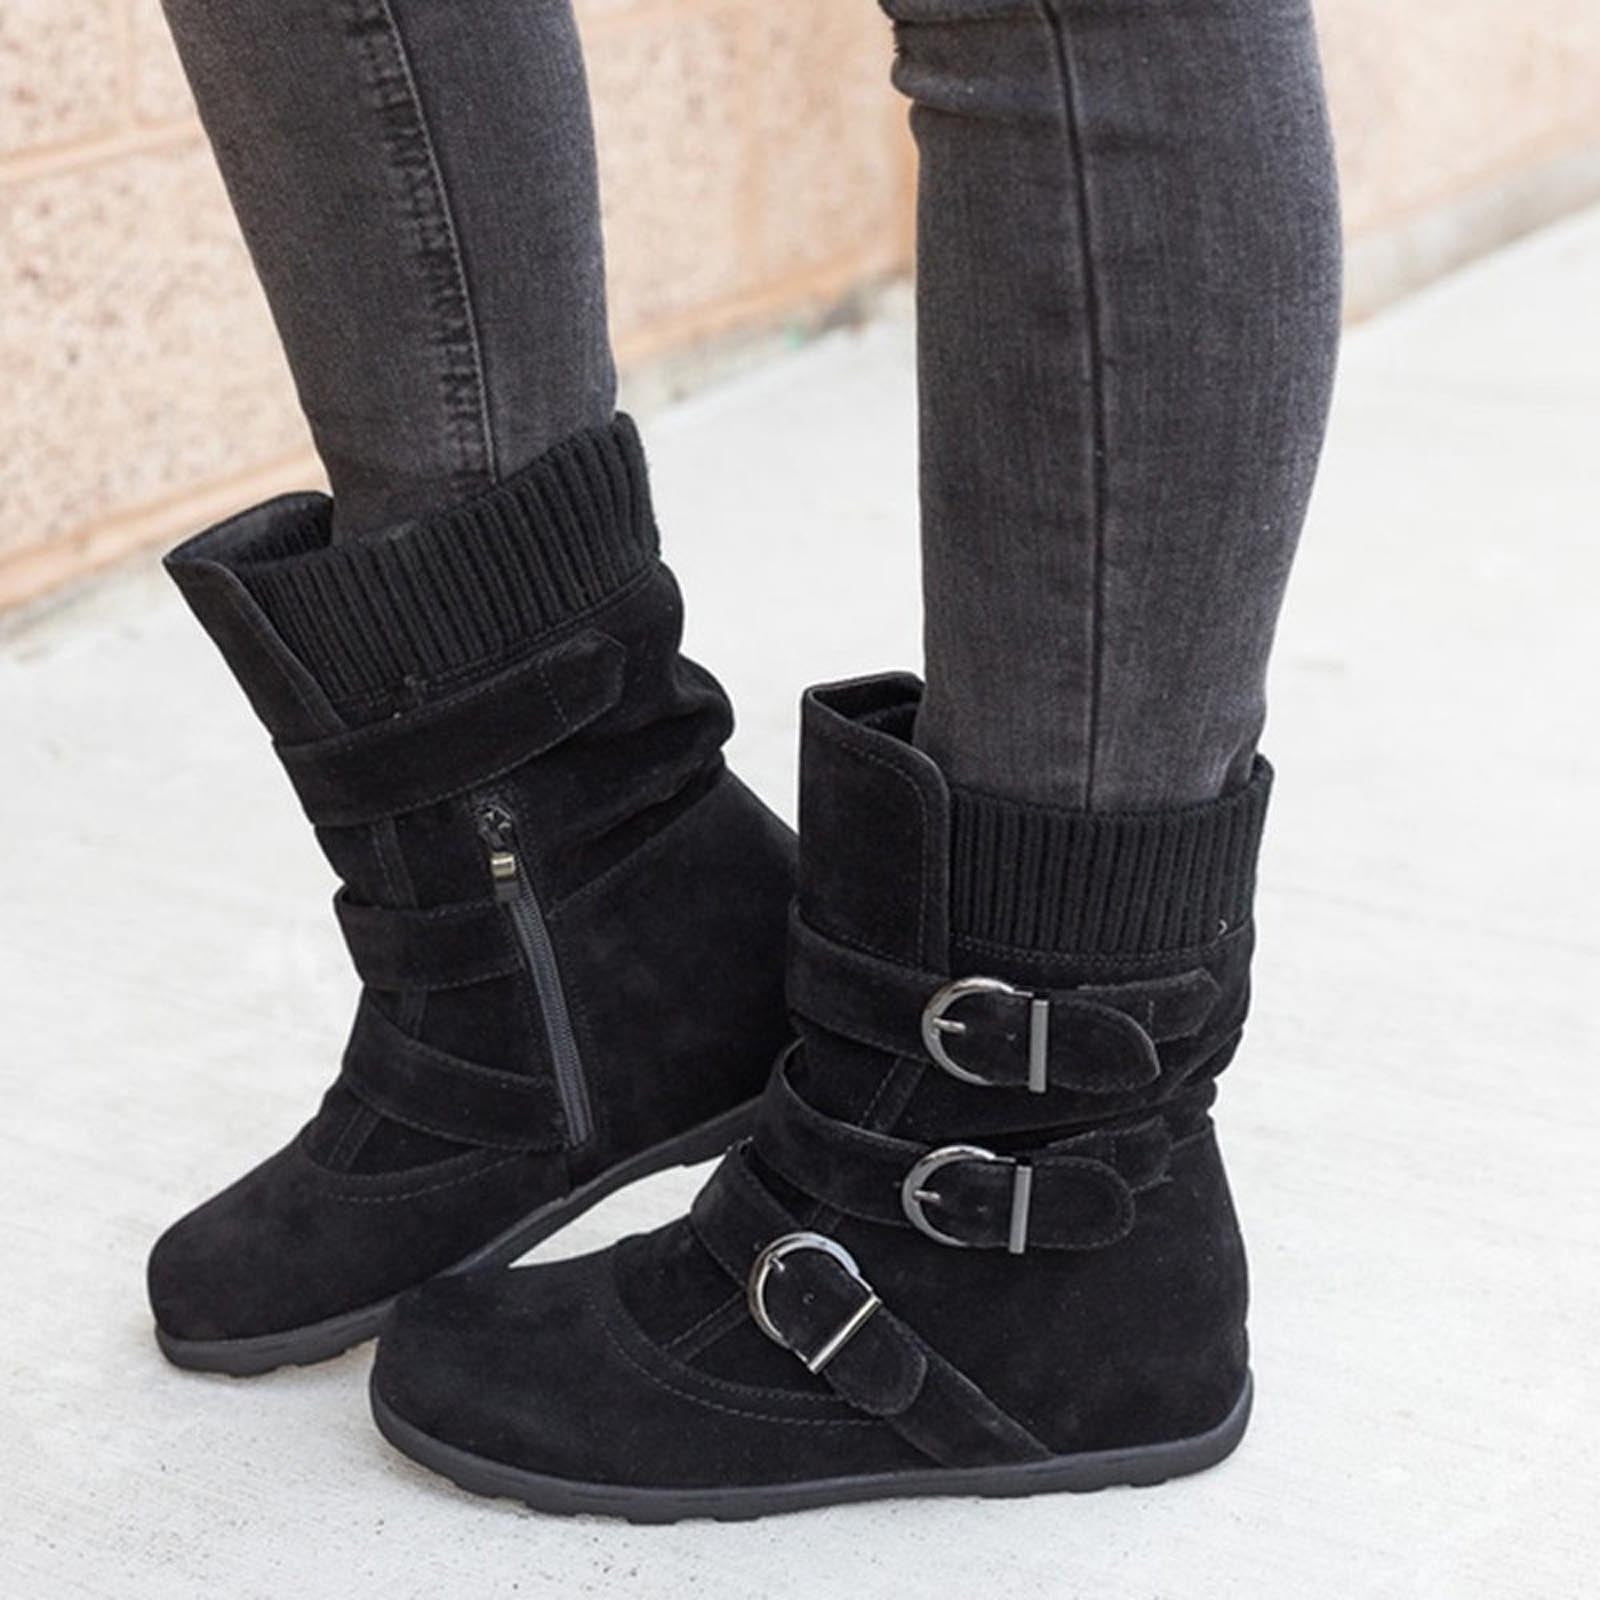 Women's Boots: Classic, Heeled, & Ankle Booties